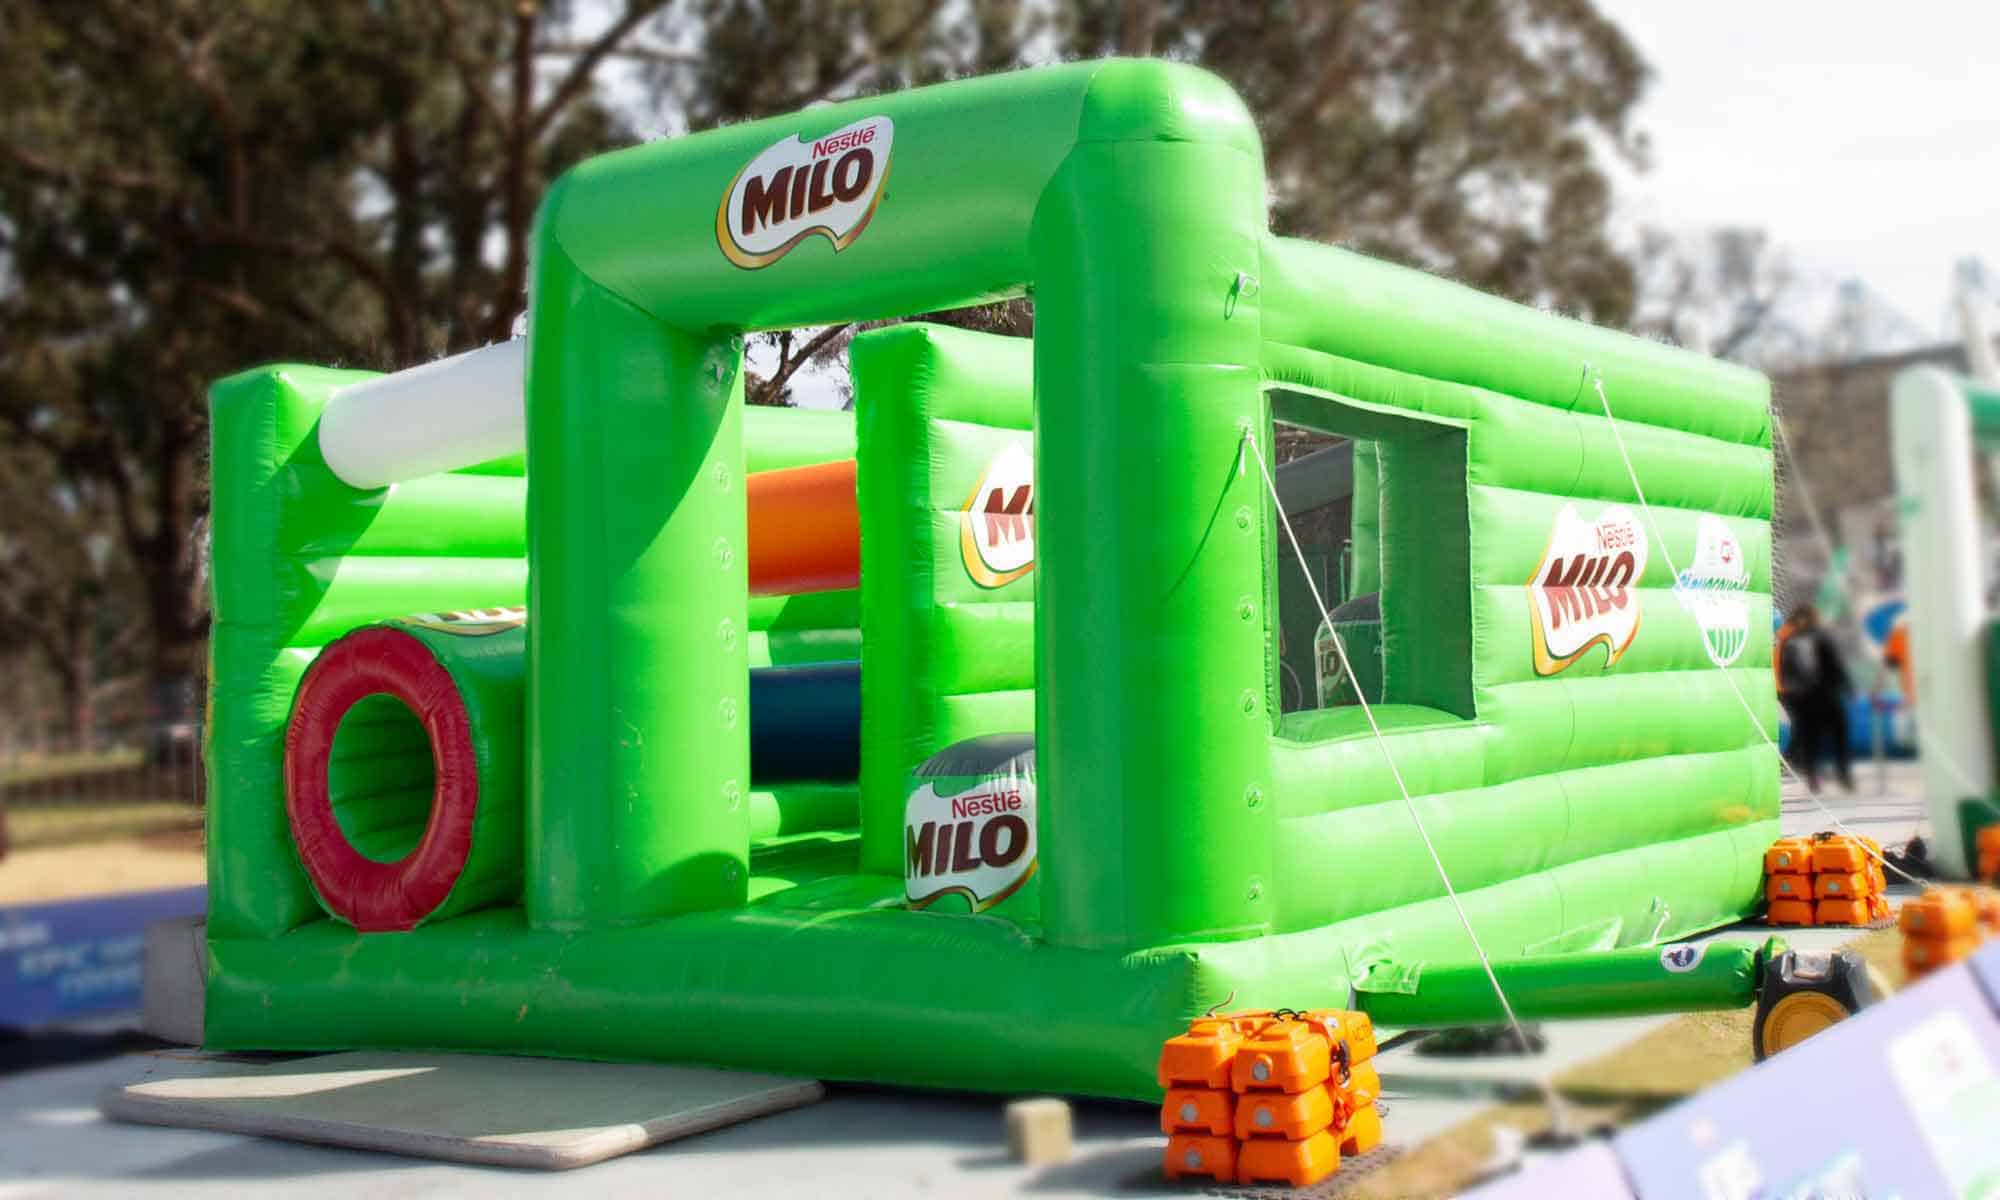 Giant inflatables has been designing and fabricating inflatable jumping castles for over 25 years